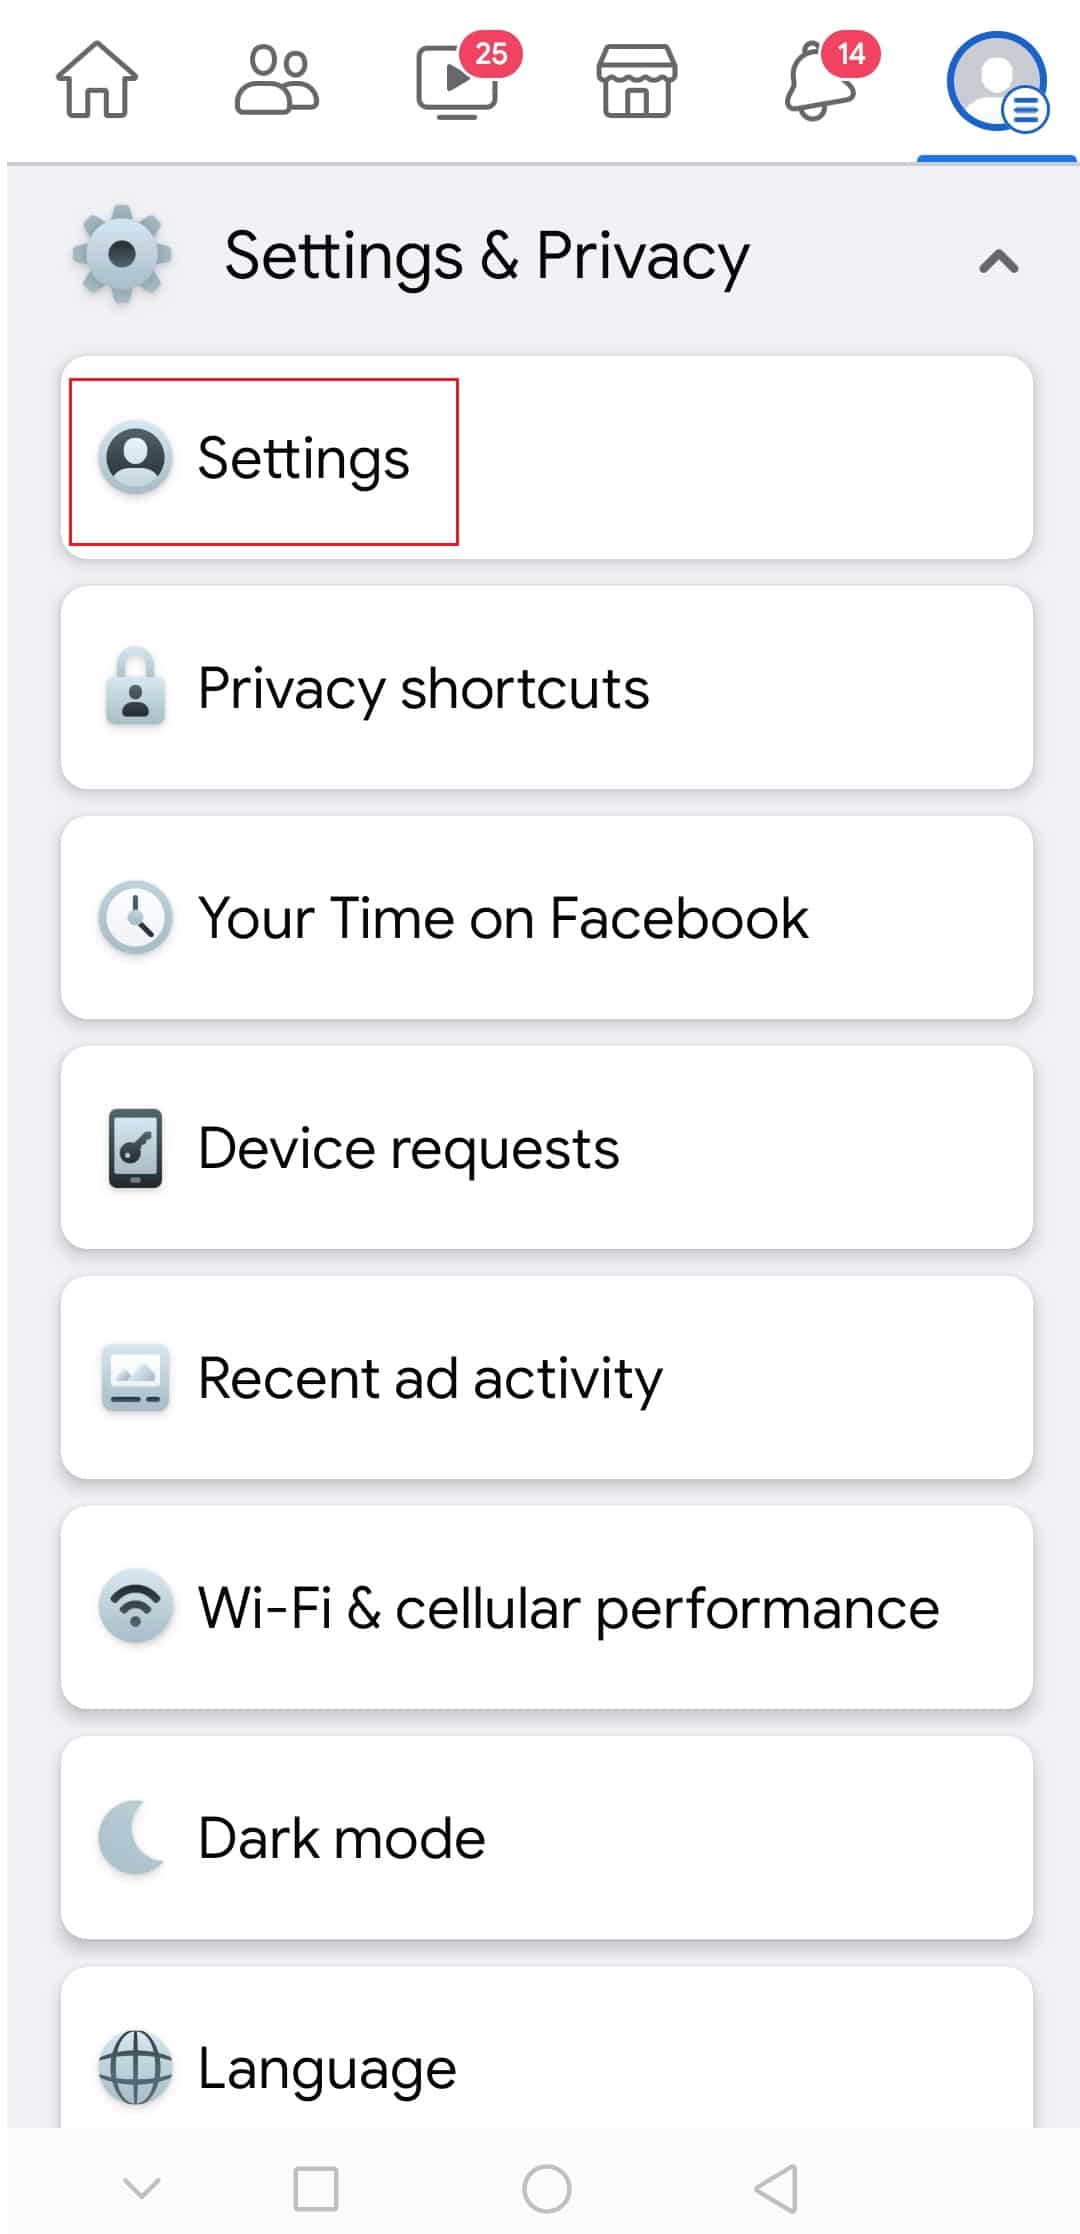 tap on Settings in Setting and Privacy menu on Facebook Android app